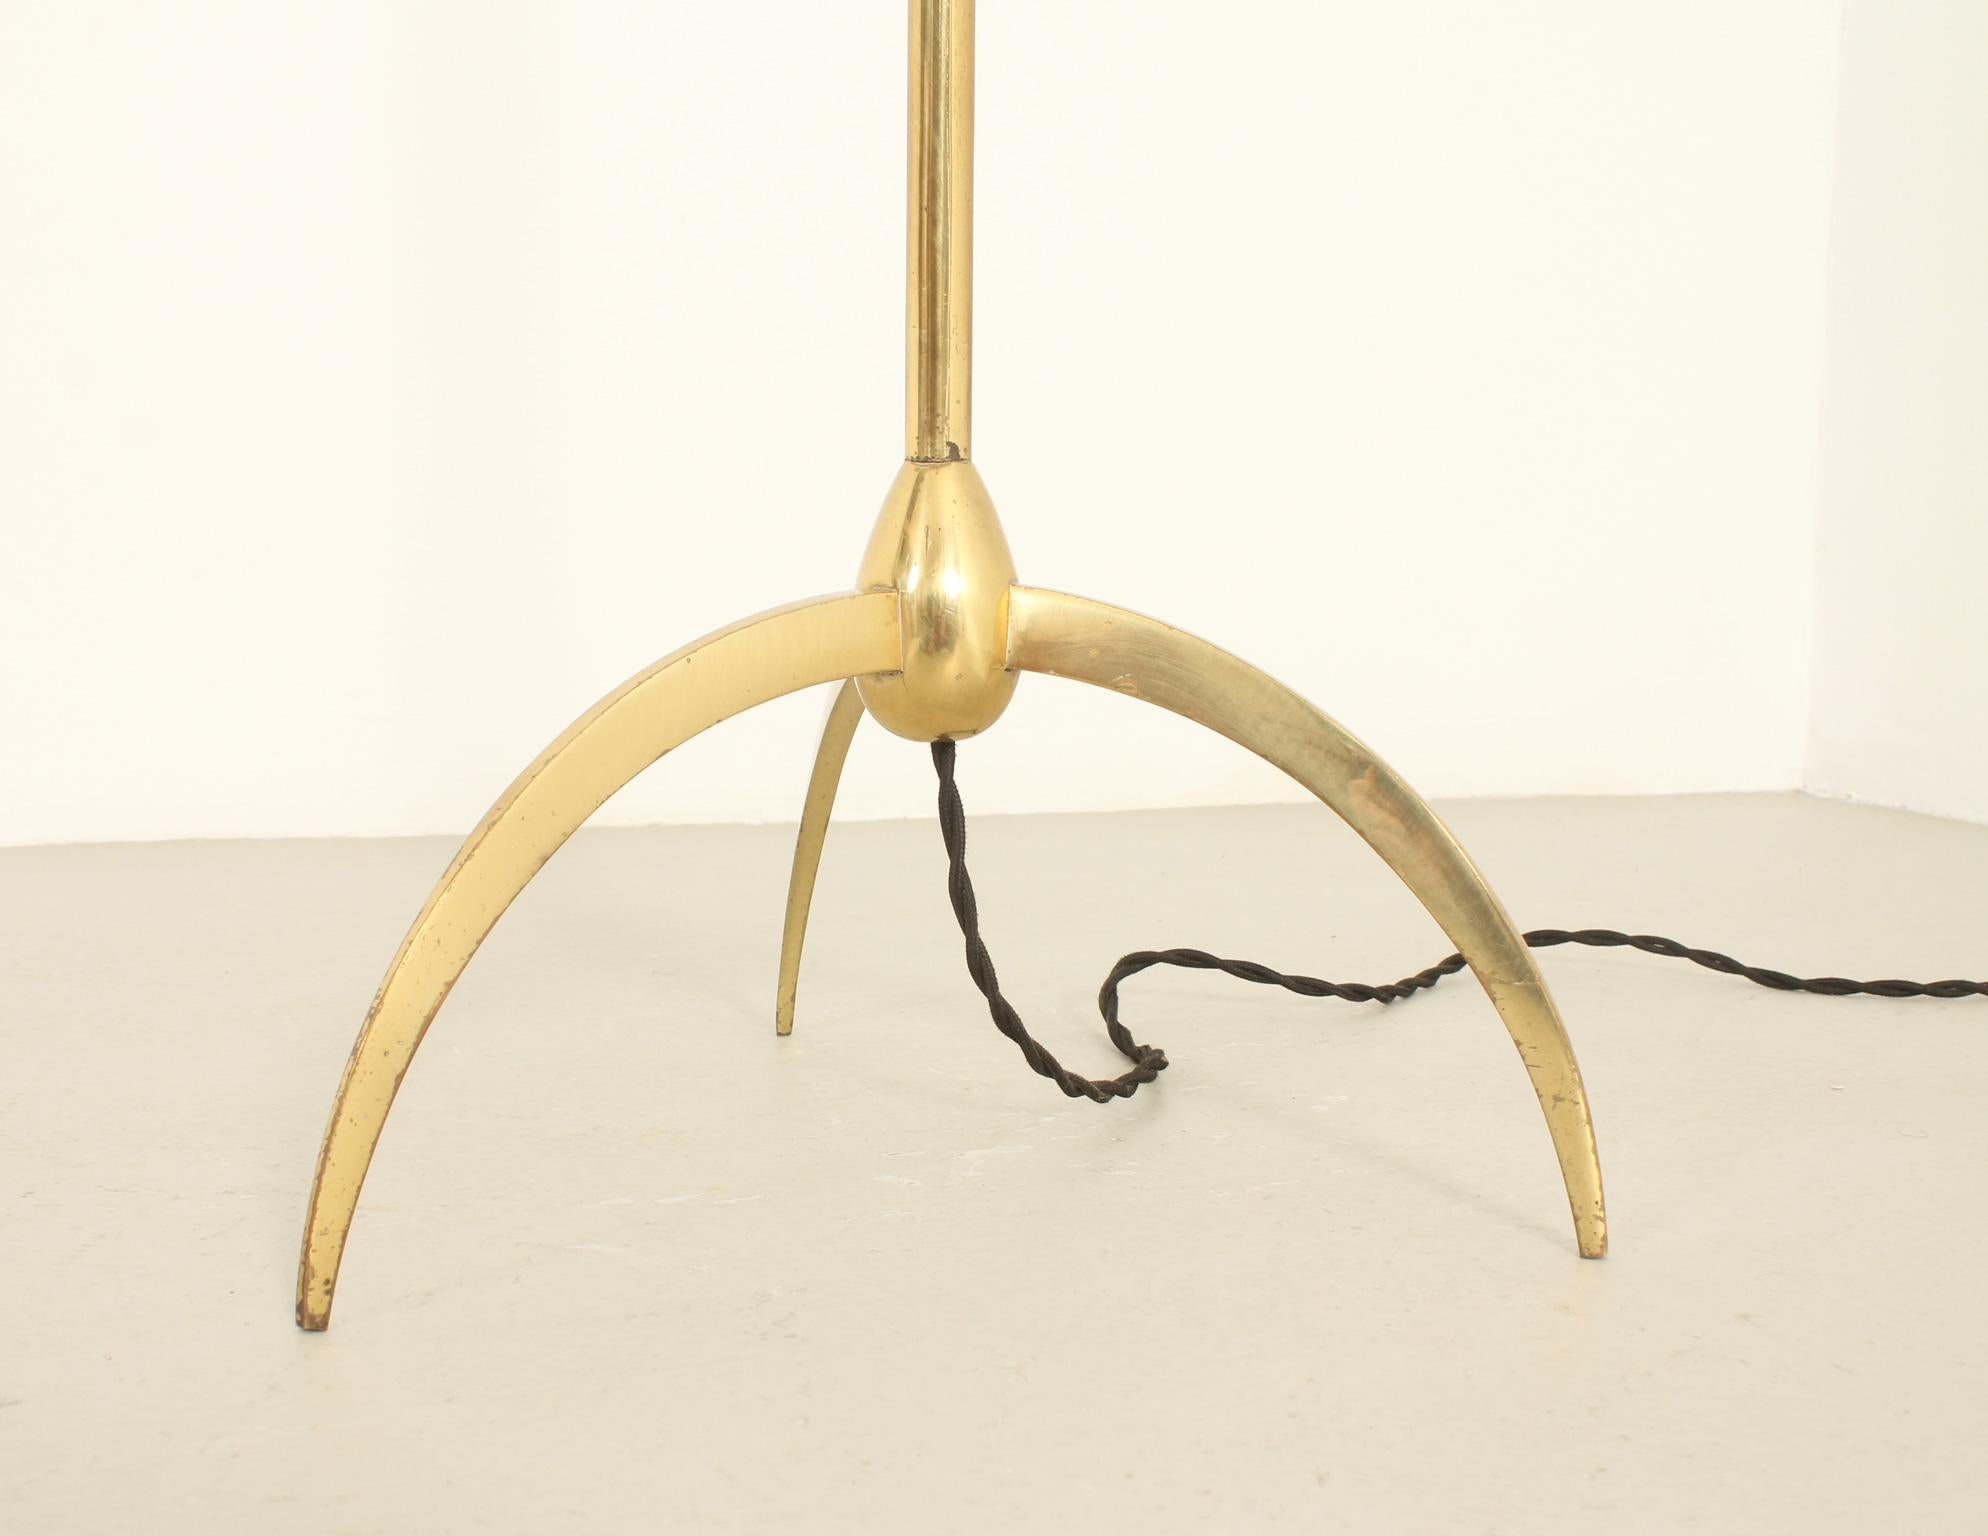 Mid-20th Century Brass Floor Lamp with Tripod Base, Spain, 1950's For Sale